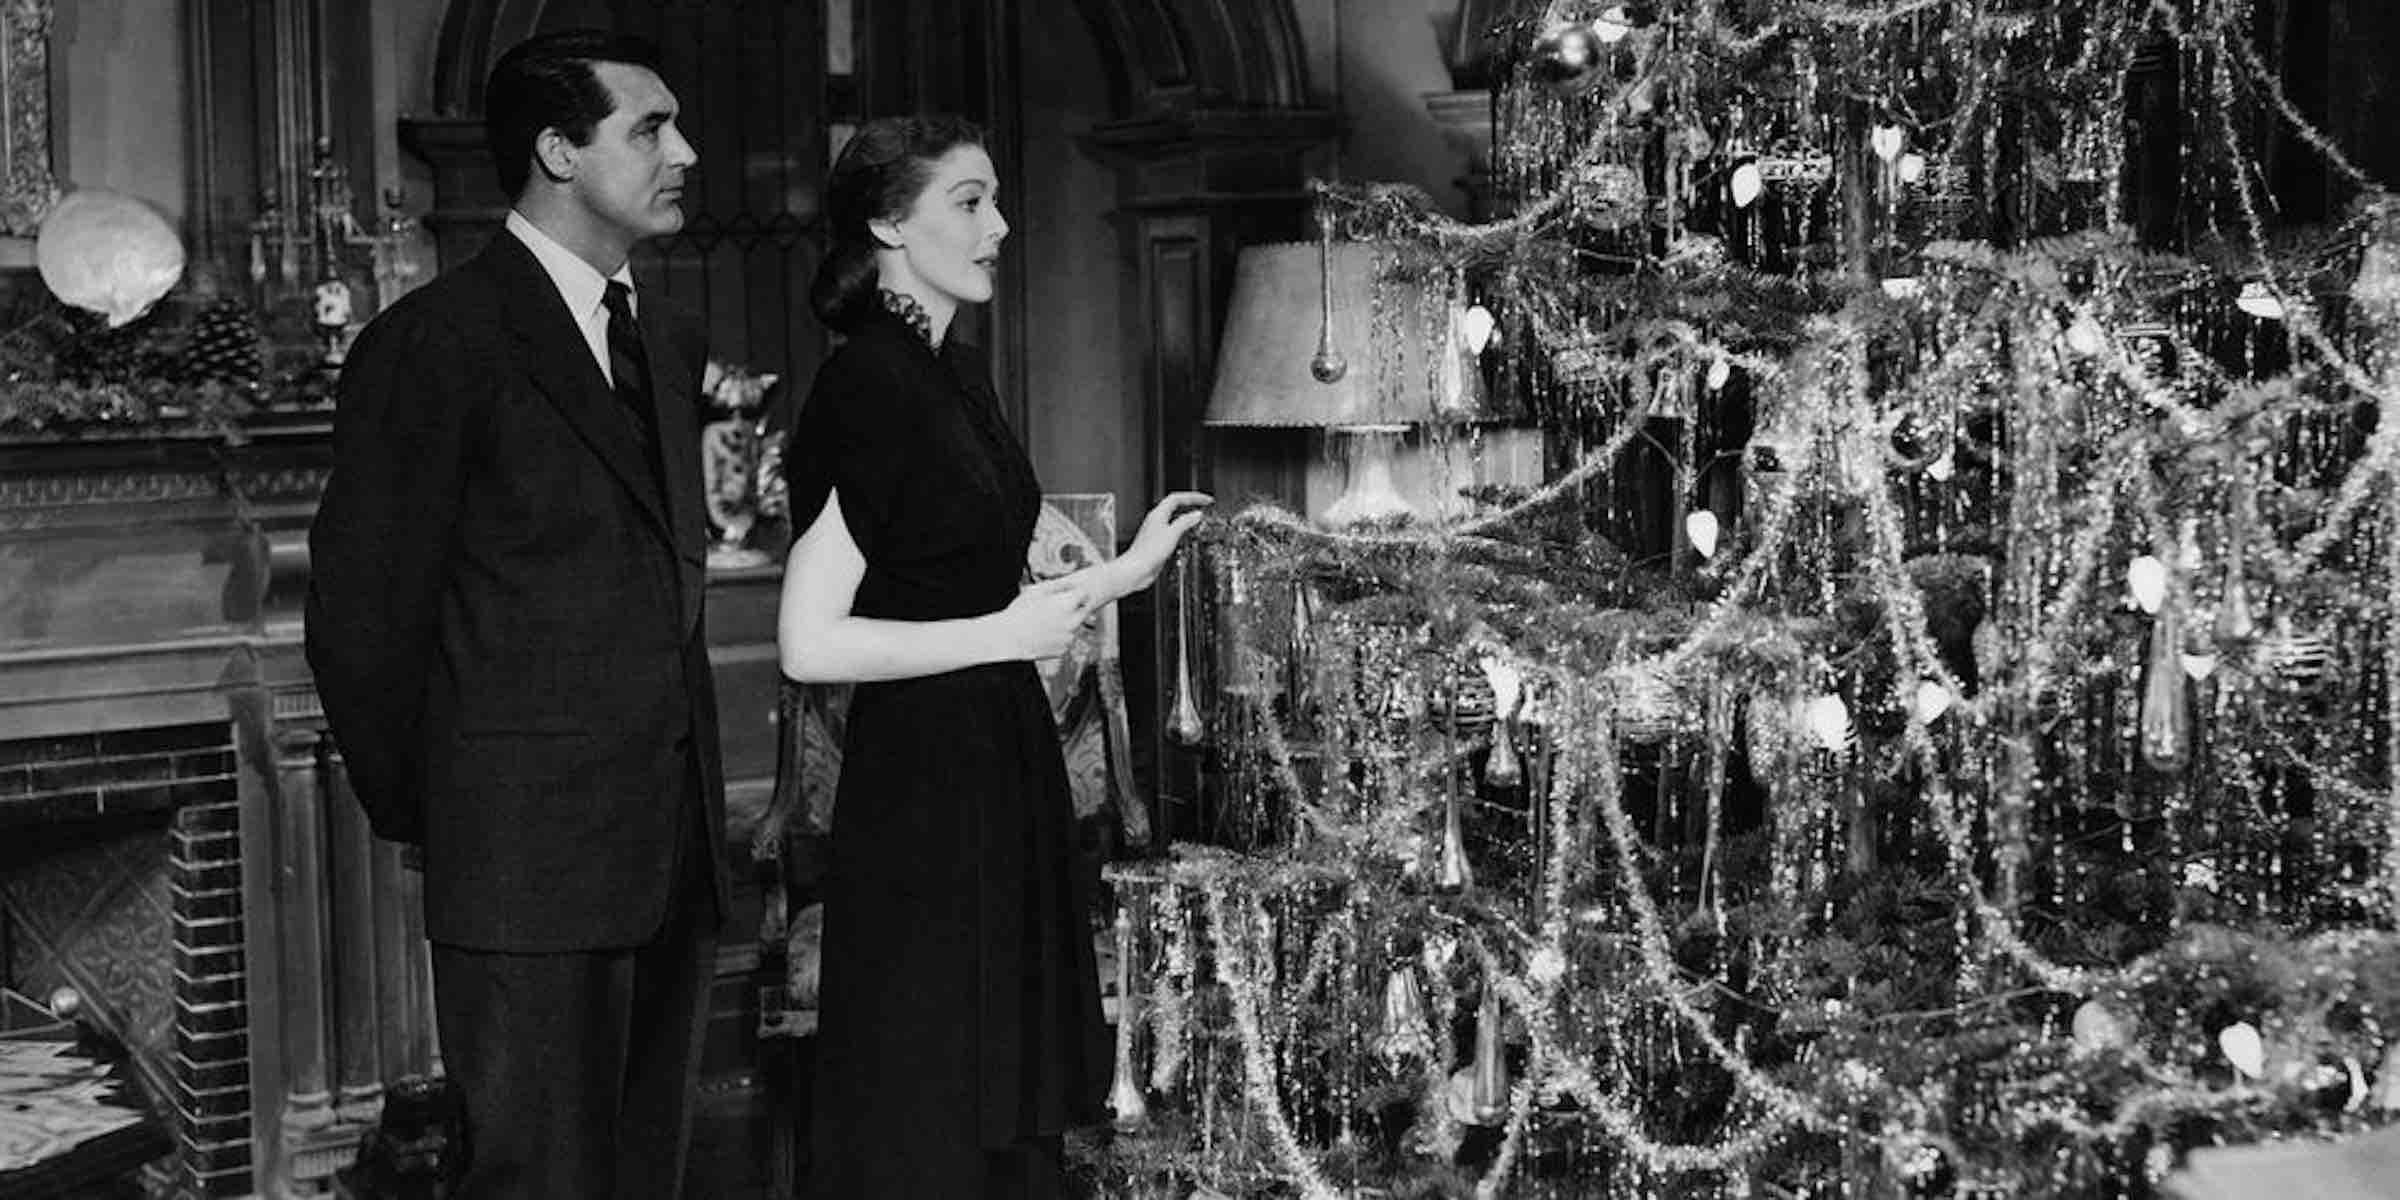 Take a step back to old Hollywood with us, as we list our favorite Christmas movies that manage to enthrall us without BB guns and attacking raccoons.